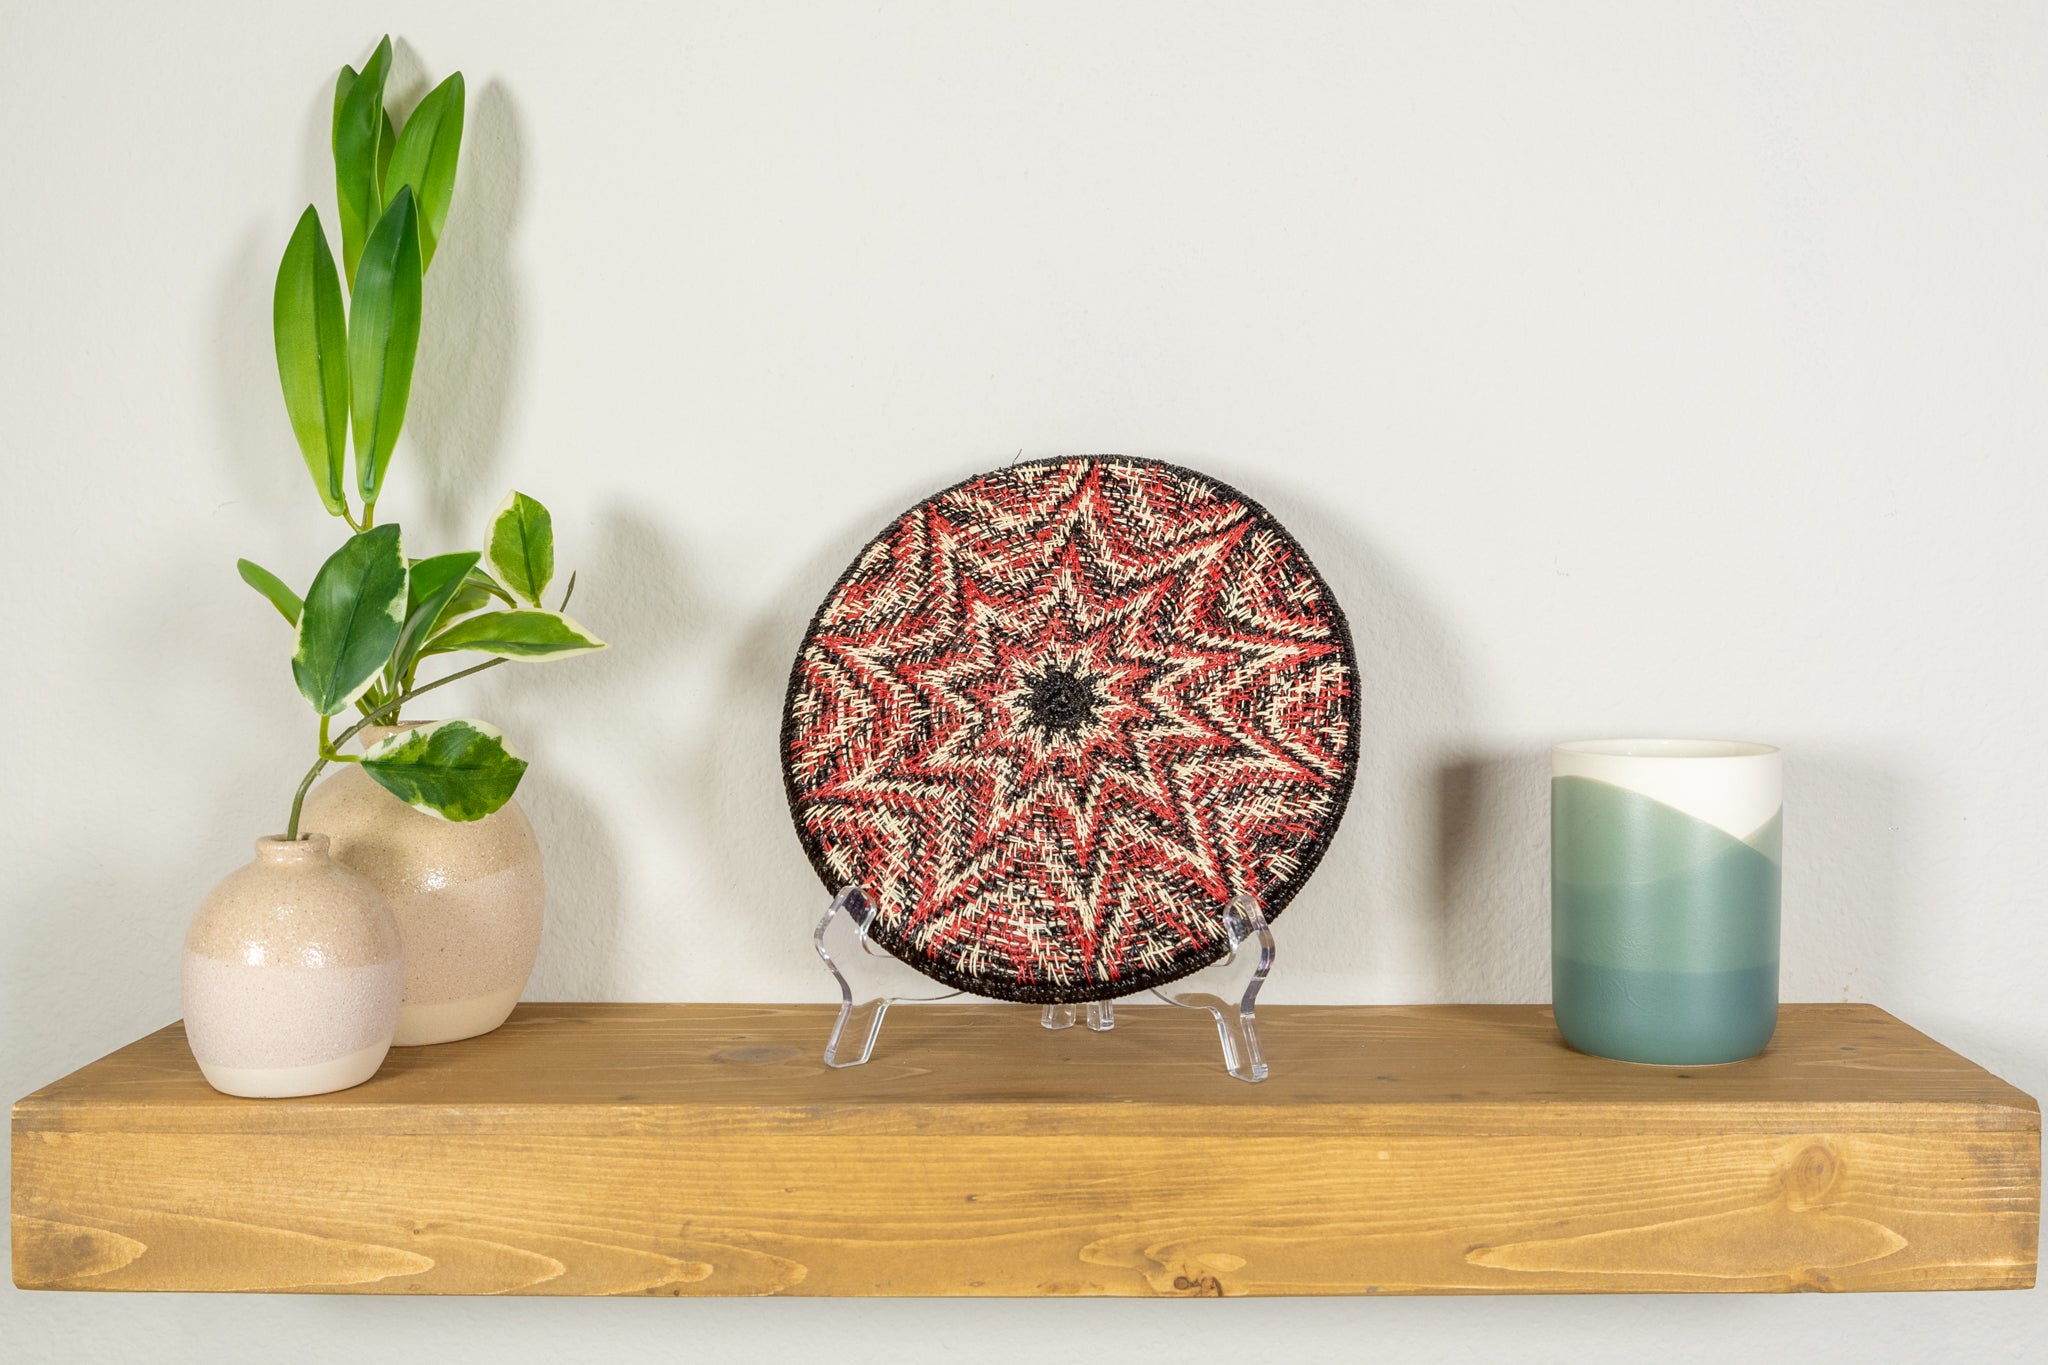 Galaxy Red Black And White Bursting Star Basket Plate